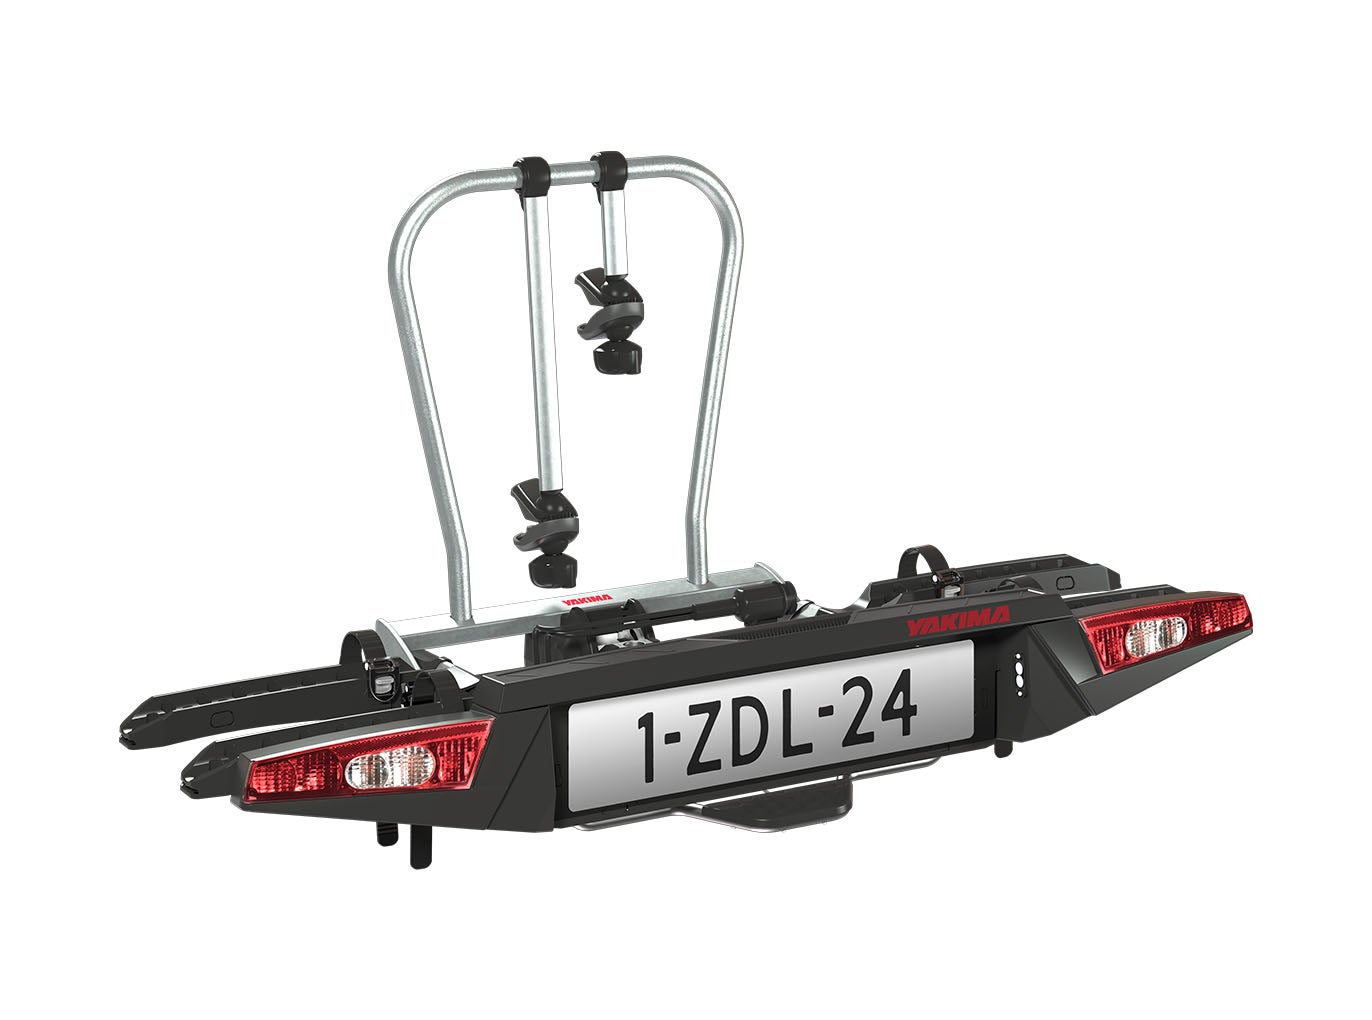 Yakima Foldclick 2, 8002495, 2 Bike Carrier, Towball Mounted Rear Bicycle Rack